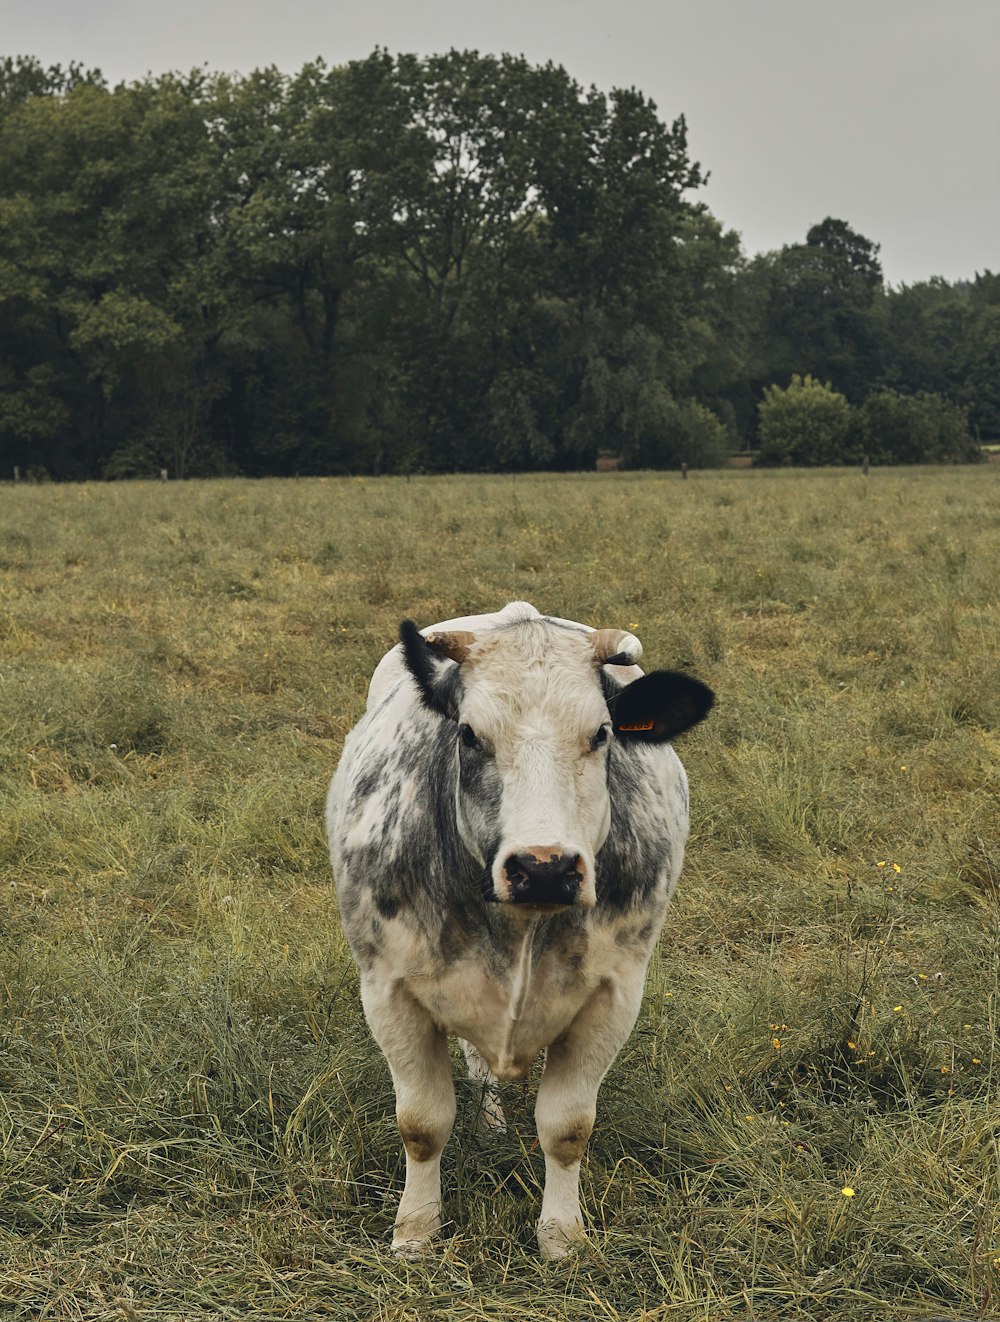 white and black cow in a green grass field during daytime